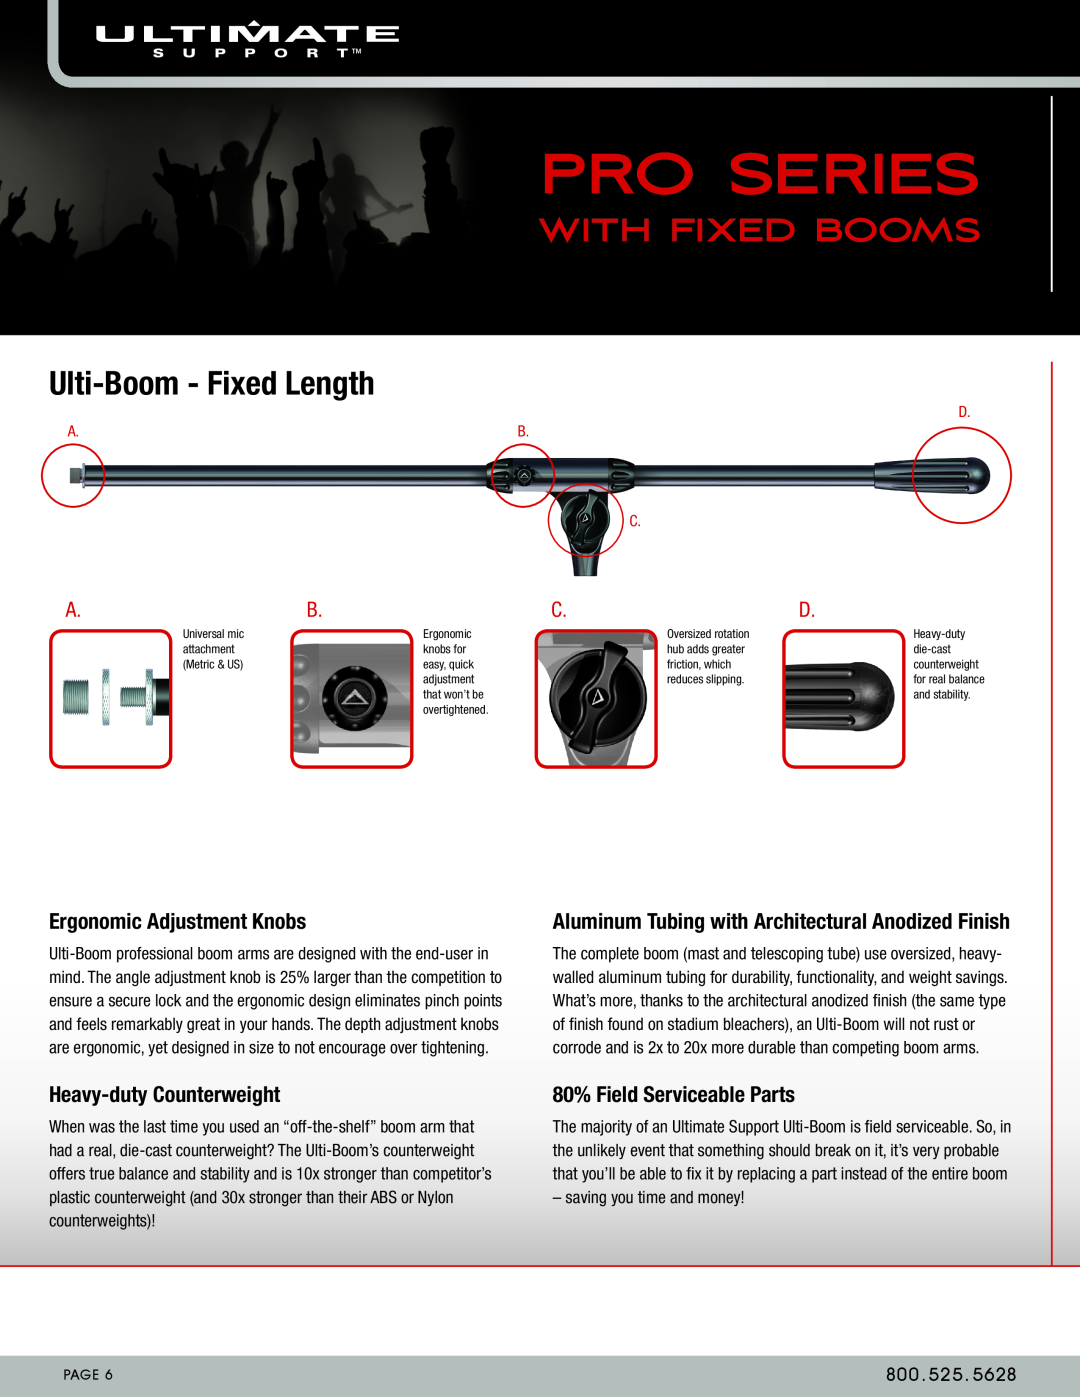 Ultimate Support Systems PRO-SB, PRO-T Ulti-Boom - Fixed Length, Pro Series, With Fixed Booms, Ergonomic Adjustment Knobs 